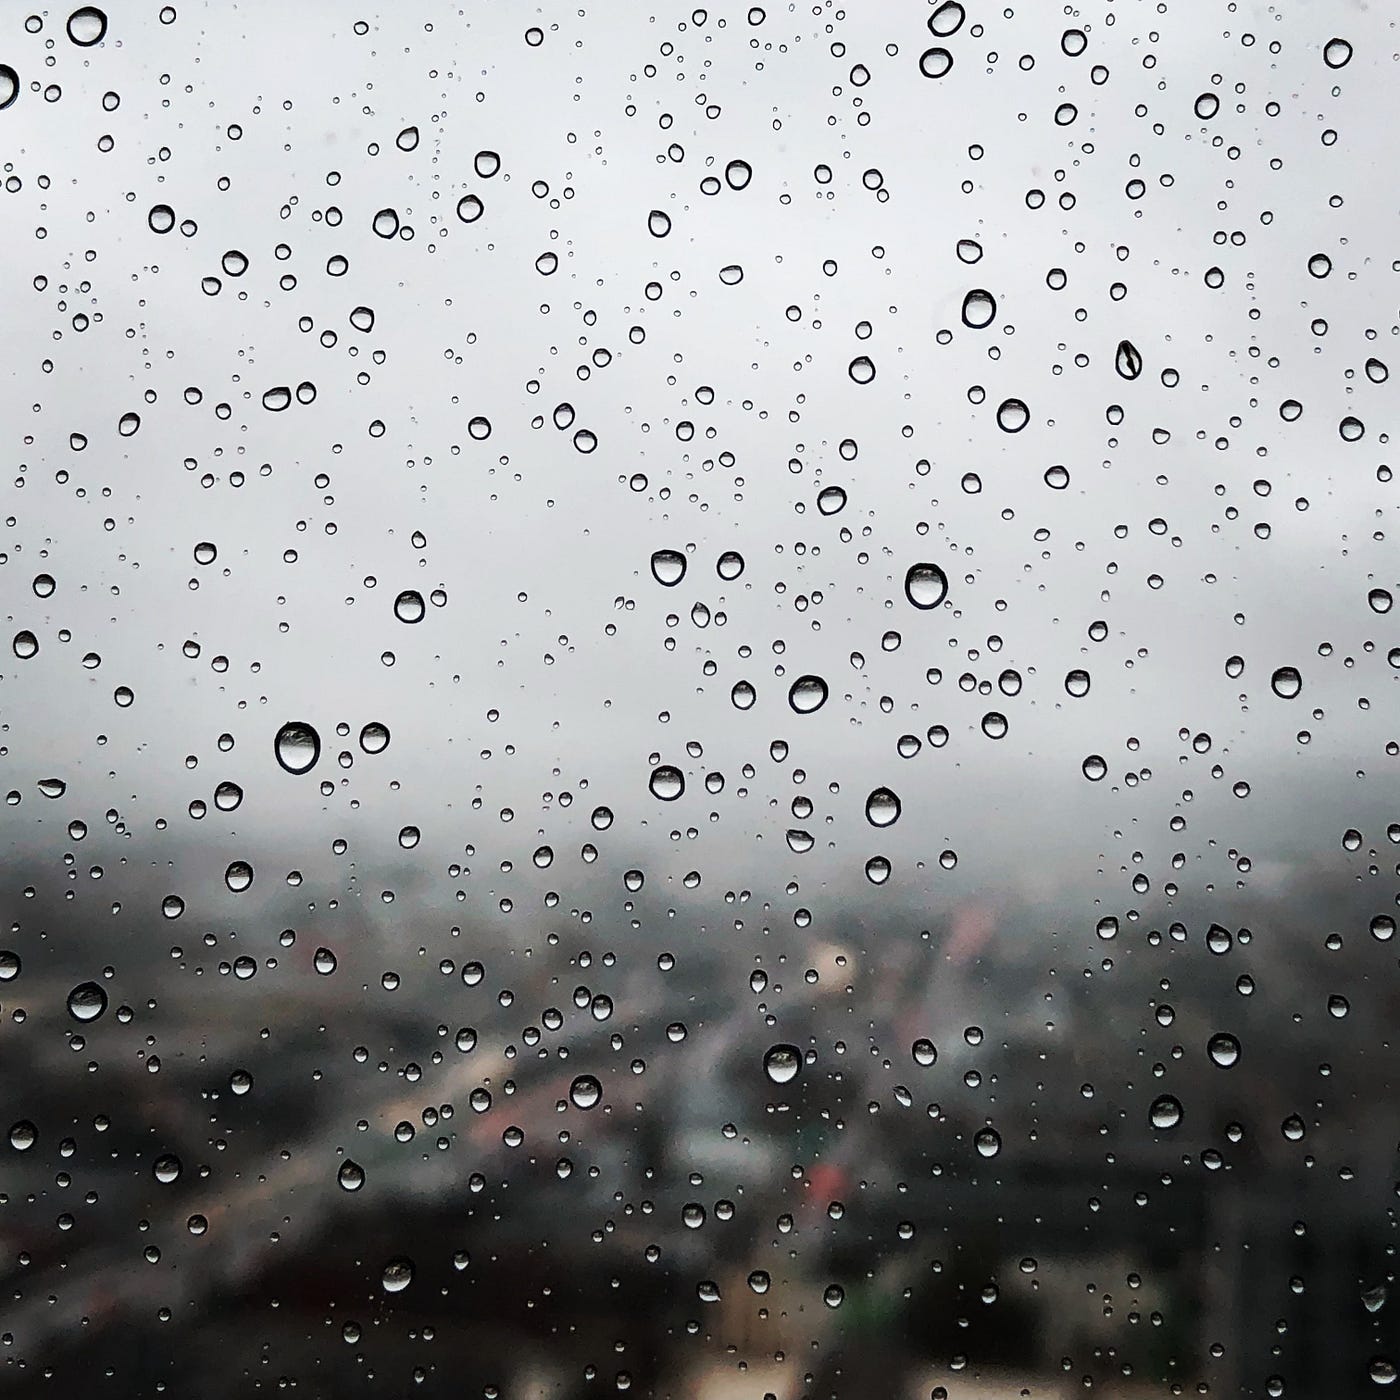 Depression and Rain: What's the Connection?